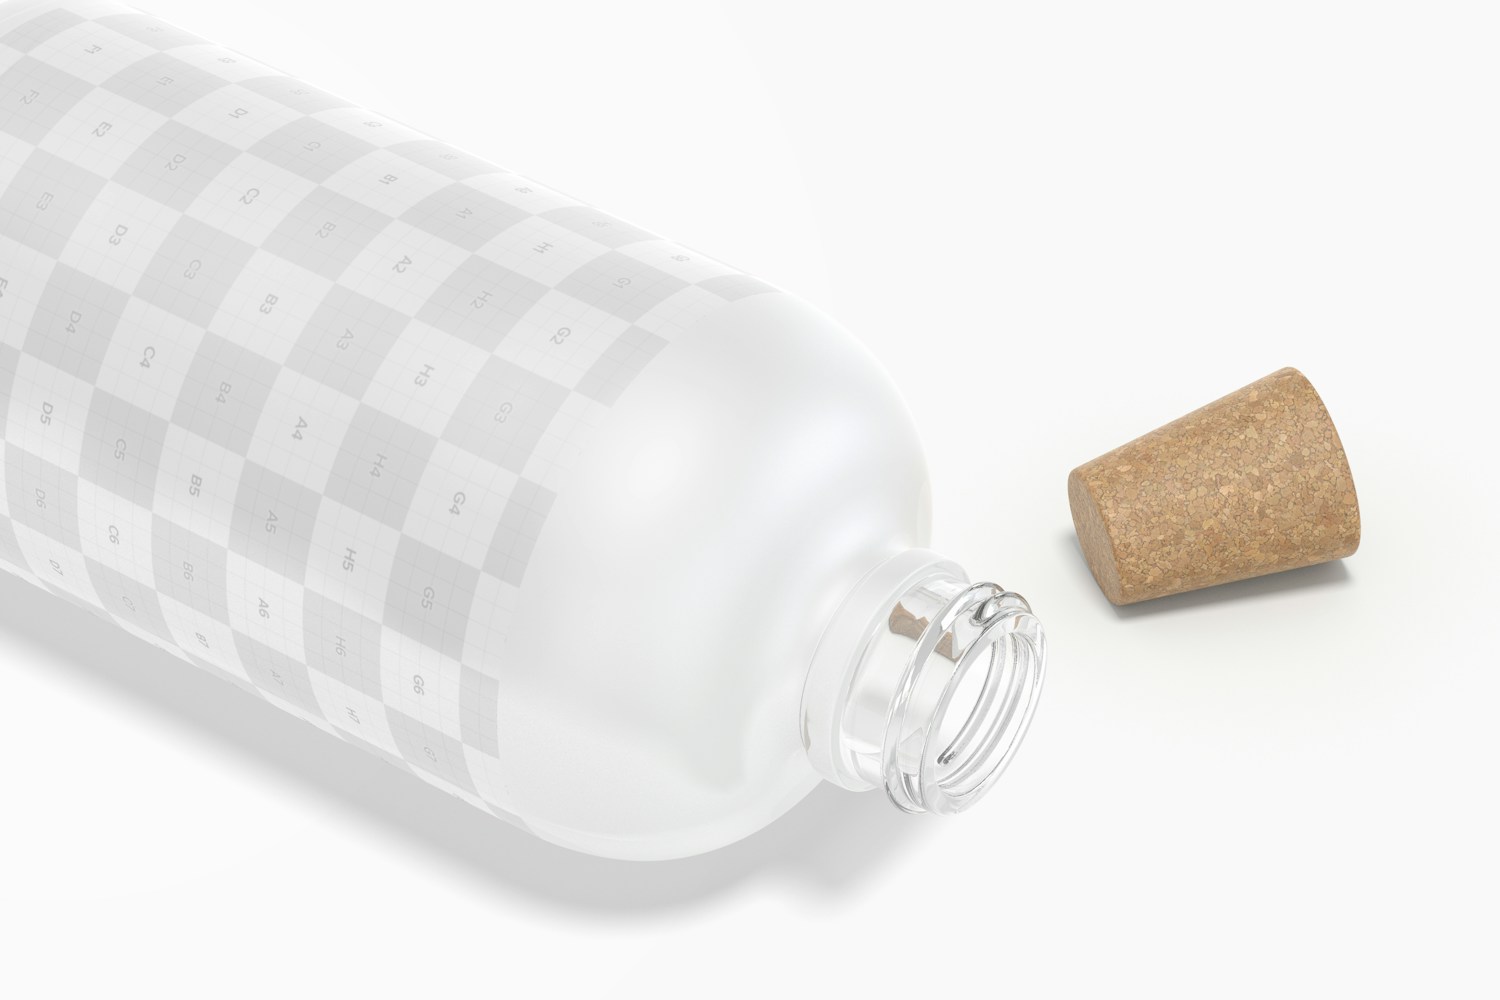 Frosted Glass Bottle with Cork Mockup, Close-Up